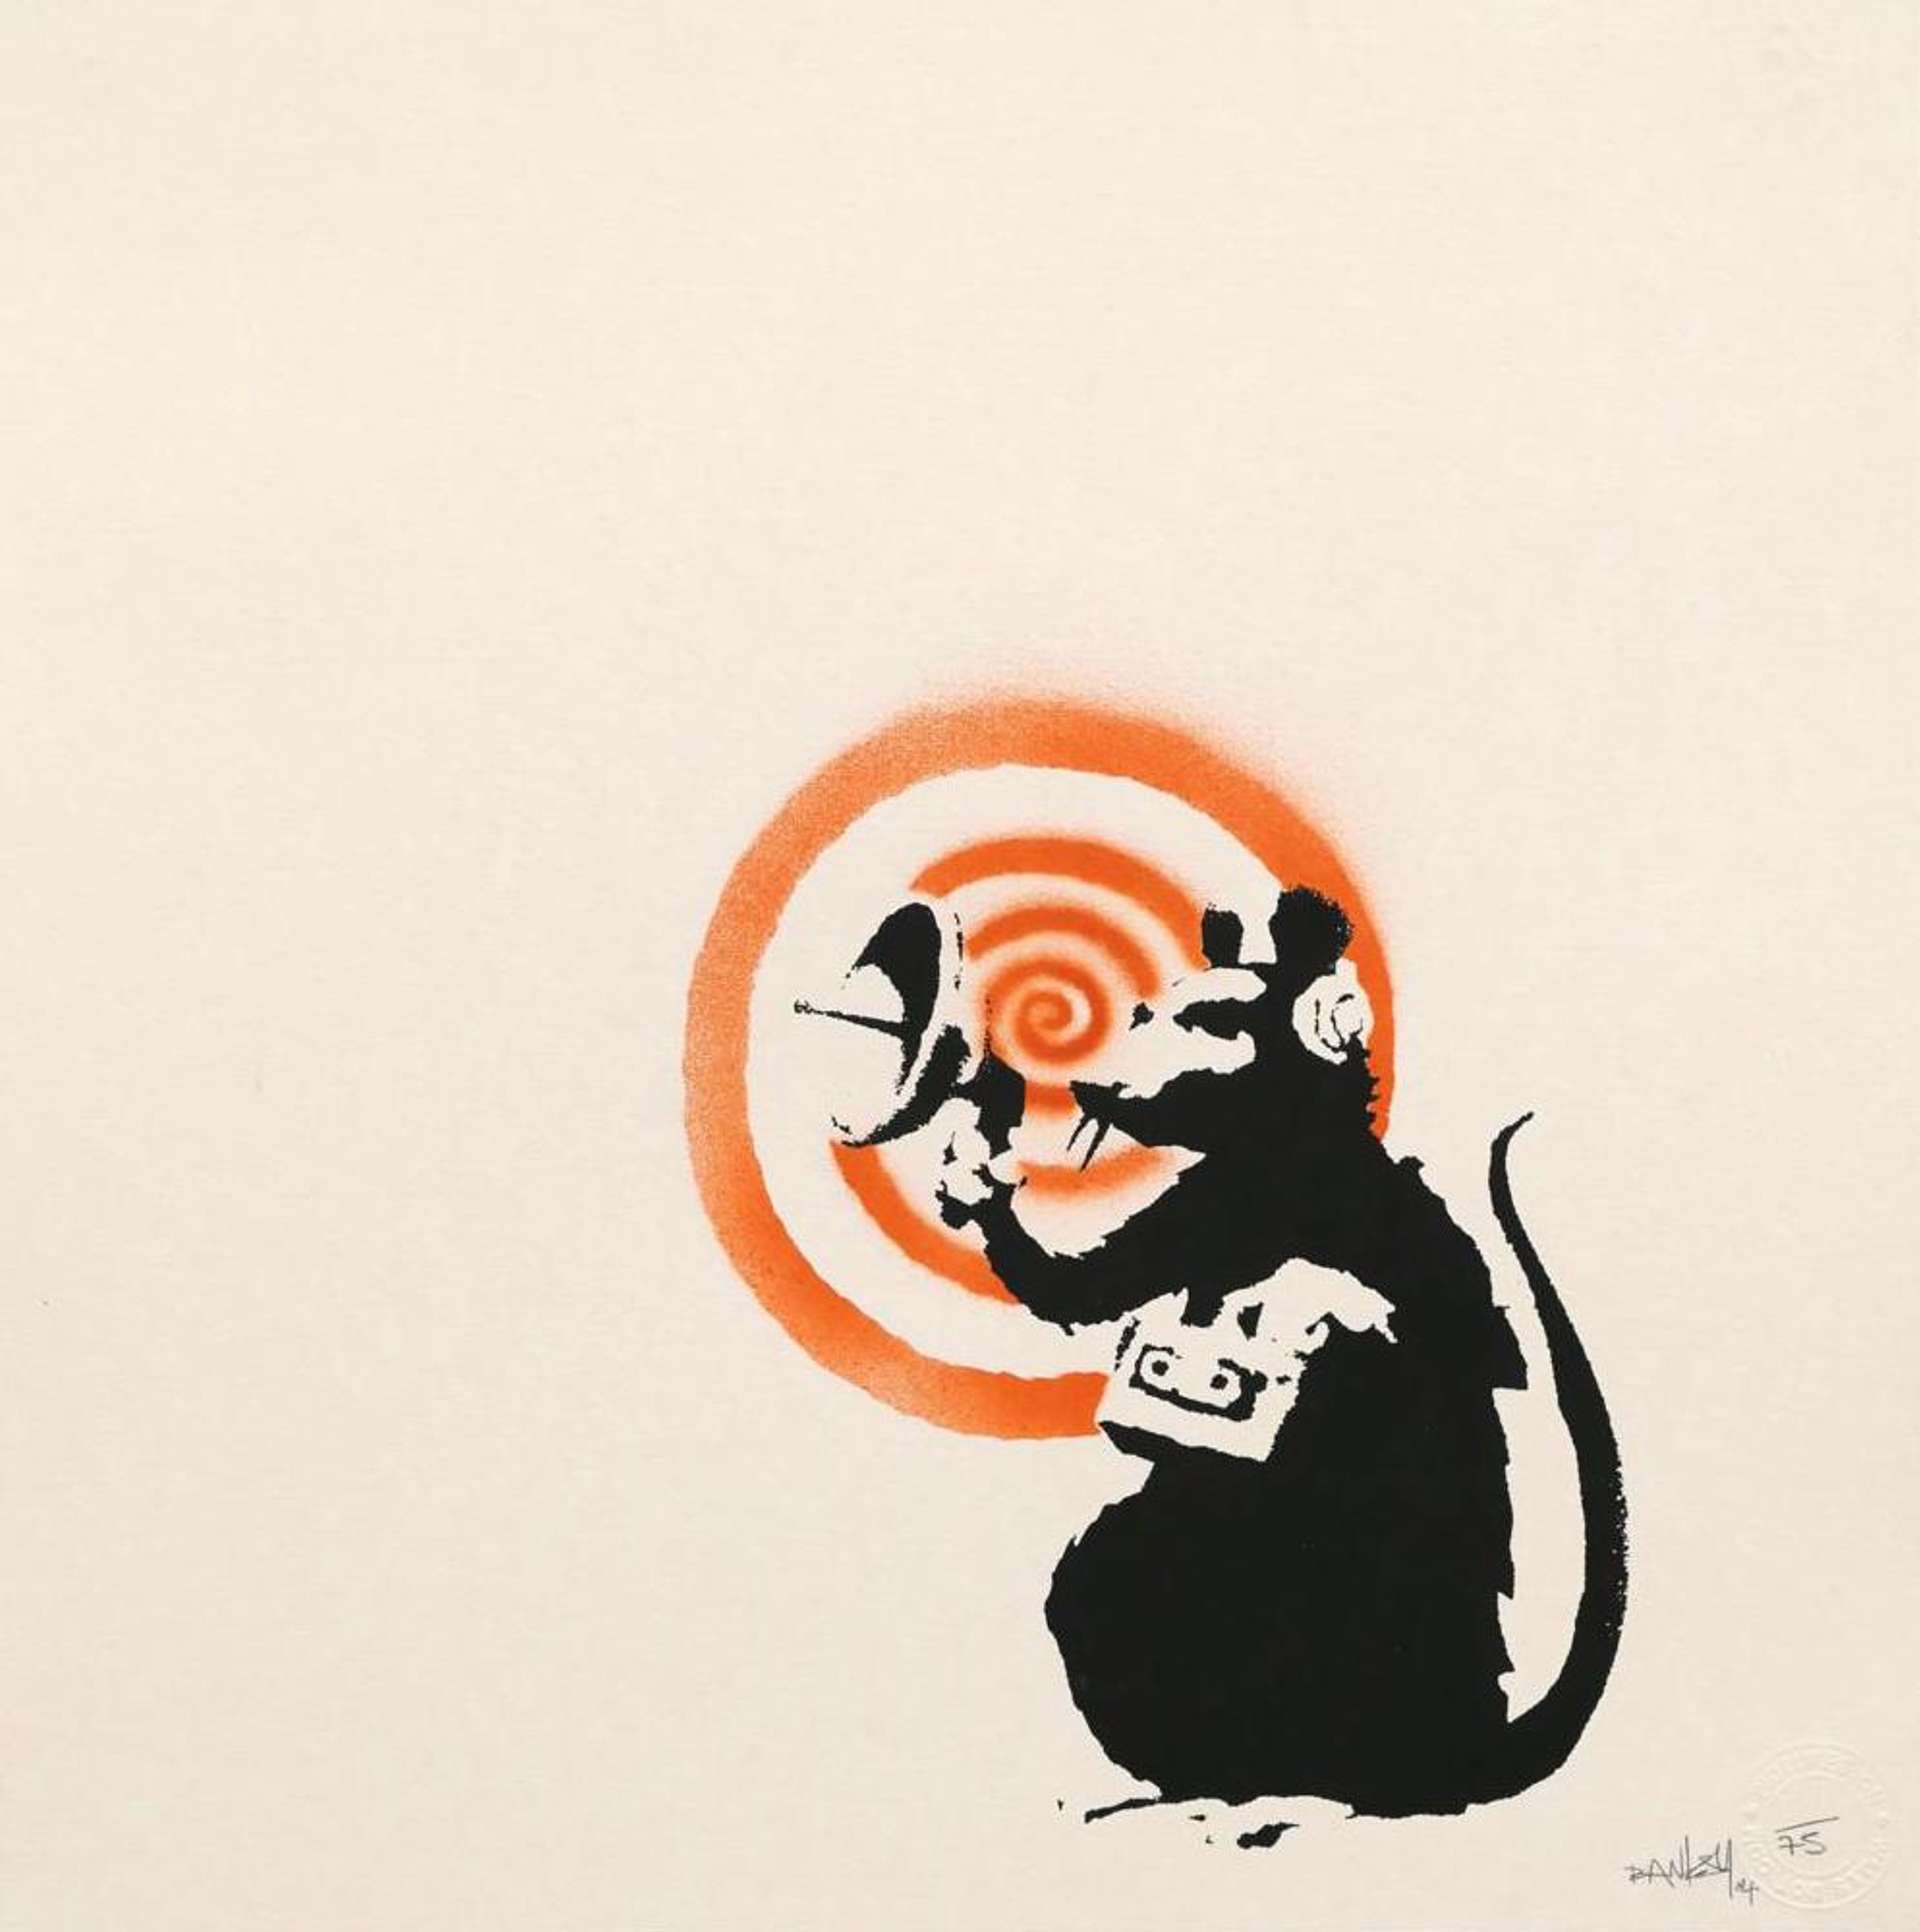 A hand finished screenprint by Banksy of a spray-painted rat holding a tape recorder and receiver, set against a sprayed red swirl on an off-white background